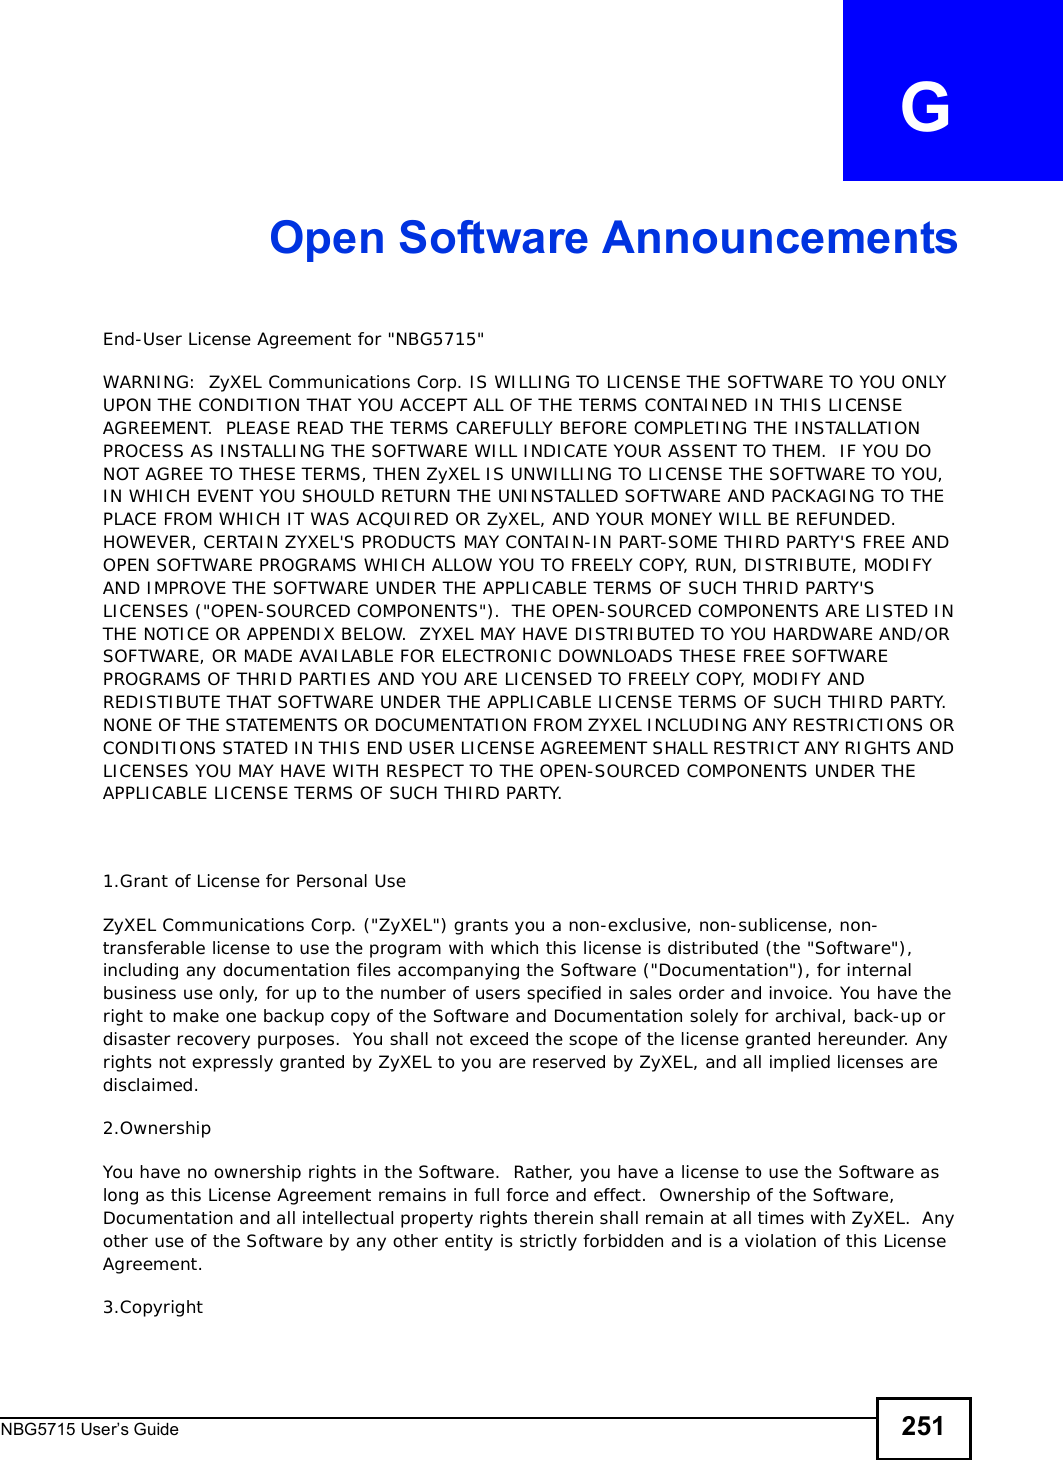 NBG5715 User’s Guide 251APPENDIX   GOpen Software AnnouncementsEnd-User License Agreement for &quot;NBG5715&quot; WARNING:  ZyXEL Communications Corp. IS WILLING TO LICENSE THE SOFTWARE TO YOU ONLY UPON THE CONDITION THAT YOU ACCEPT ALL OF THE TERMS CONTAINED IN THIS LICENSE AGREEMENT.  PLEASE READ THE TERMS CAREFULLY BEFORE COMPLETING THE INSTALLATION PROCESS AS INSTALLING THE SOFTWARE WILL INDICATE YOUR ASSENT TO THEM.  IF YOU DO NOT AGREE TO THESE TERMS, THEN ZyXEL IS UNWILLING TO LICENSE THE SOFTWARE TO YOU, IN WHICH EVENT YOU SHOULD RETURN THE UNINSTALLED SOFTWARE AND PACKAGING TO THE PLACE FROM WHICH IT WAS ACQUIRED OR ZyXEL, AND YOUR MONEY WILL BE REFUNDED.   HOWEVER, CERTAIN ZYXEL&apos;S PRODUCTS MAY CONTAIN-IN PART-SOME THIRD PARTY&apos;S FREE AND OPEN SOFTWARE PROGRAMS WHICH ALLOW YOU TO FREELY COPY, RUN, DISTRIBUTE, MODIFY AND IMPROVE THE SOFTWARE UNDER THE APPLICABLE TERMS OF SUCH THRID PARTY&apos;S LICENSES (&quot;OPEN-SOURCED COMPONENTS&quot;).  THE OPEN-SOURCED COMPONENTS ARE LISTED IN THE NOTICE OR APPENDIX BELOW.  ZYXEL MAY HAVE DISTRIBUTED TO YOU HARDWARE AND/OR SOFTWARE, OR MADE AVAILABLE FOR ELECTRONIC DOWNLOADS THESE FREE SOFTWARE PROGRAMS OF THRID PARTIES AND YOU ARE LICENSED TO FREELY COPY, MODIFY AND REDISTIBUTE THAT SOFTWARE UNDER THE APPLICABLE LICENSE TERMS OF SUCH THIRD PARTY.  NONE OF THE STATEMENTS OR DOCUMENTATION FROM ZYXEL INCLUDING ANY RESTRICTIONS OR CONDITIONS STATED IN THIS END USER LICENSE AGREEMENT SHALL RESTRICT ANY RIGHTS AND LICENSES YOU MAY HAVE WITH RESPECT TO THE OPEN-SOURCED COMPONENTS UNDER THE APPLICABLE LICENSE TERMS OF SUCH THIRD PARTY.   1.Grant of License for Personal UseZyXEL Communications Corp. (&quot;ZyXEL&quot;) grants you a non-exclusive, non-sublicense, non-transferable license to use the program with which this license is distributed (the &quot;Software&quot;), including any documentation files accompanying the Software (&quot;Documentation&quot;), for internal business use only, for up to the number of users specified in sales order and invoice. You have the right to make one backup copy of the Software and Documentation solely for archival, back-up or disaster recovery purposes.  You shall not exceed the scope of the license granted hereunder. Any rights not expressly granted by ZyXEL to you are reserved by ZyXEL, and all implied licenses are disclaimed.2.OwnershipYou have no ownership rights in the Software.  Rather, you have a license to use the Software as long as this License Agreement remains in full force and effect.  Ownership of the Software, Documentation and all intellectual property rights therein shall remain at all times with ZyXEL.  Any other use of the Software by any other entity is strictly forbidden and is a violation of this License Agreement.3.Copyright